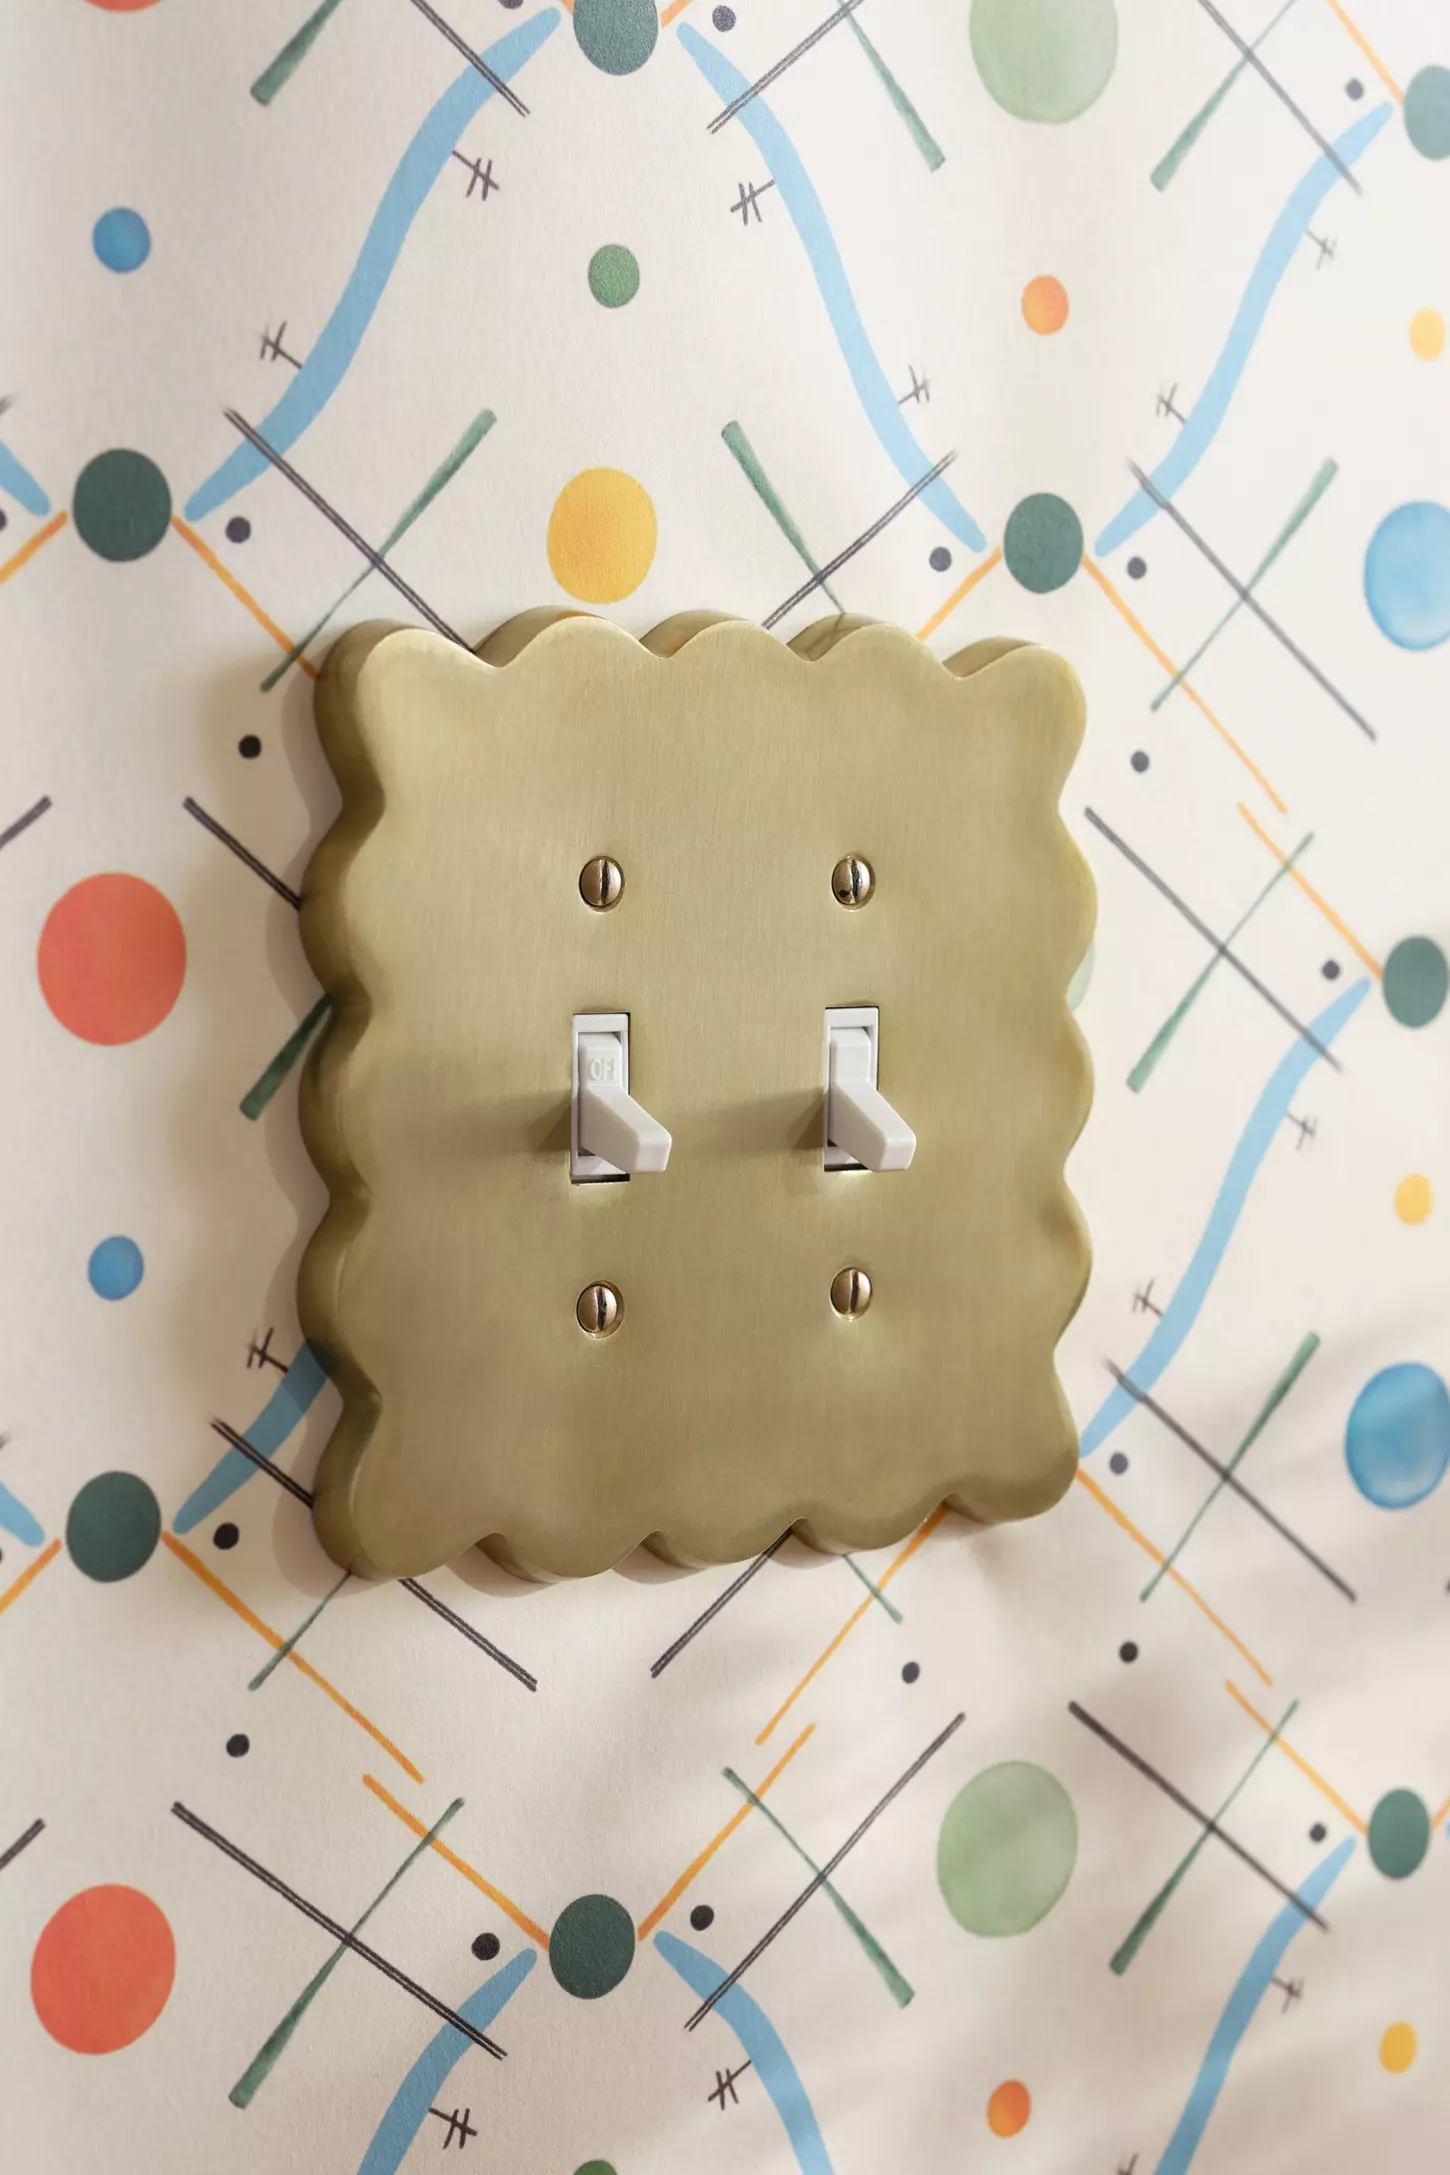 A light switch cover flanked by colorful wallpaper.